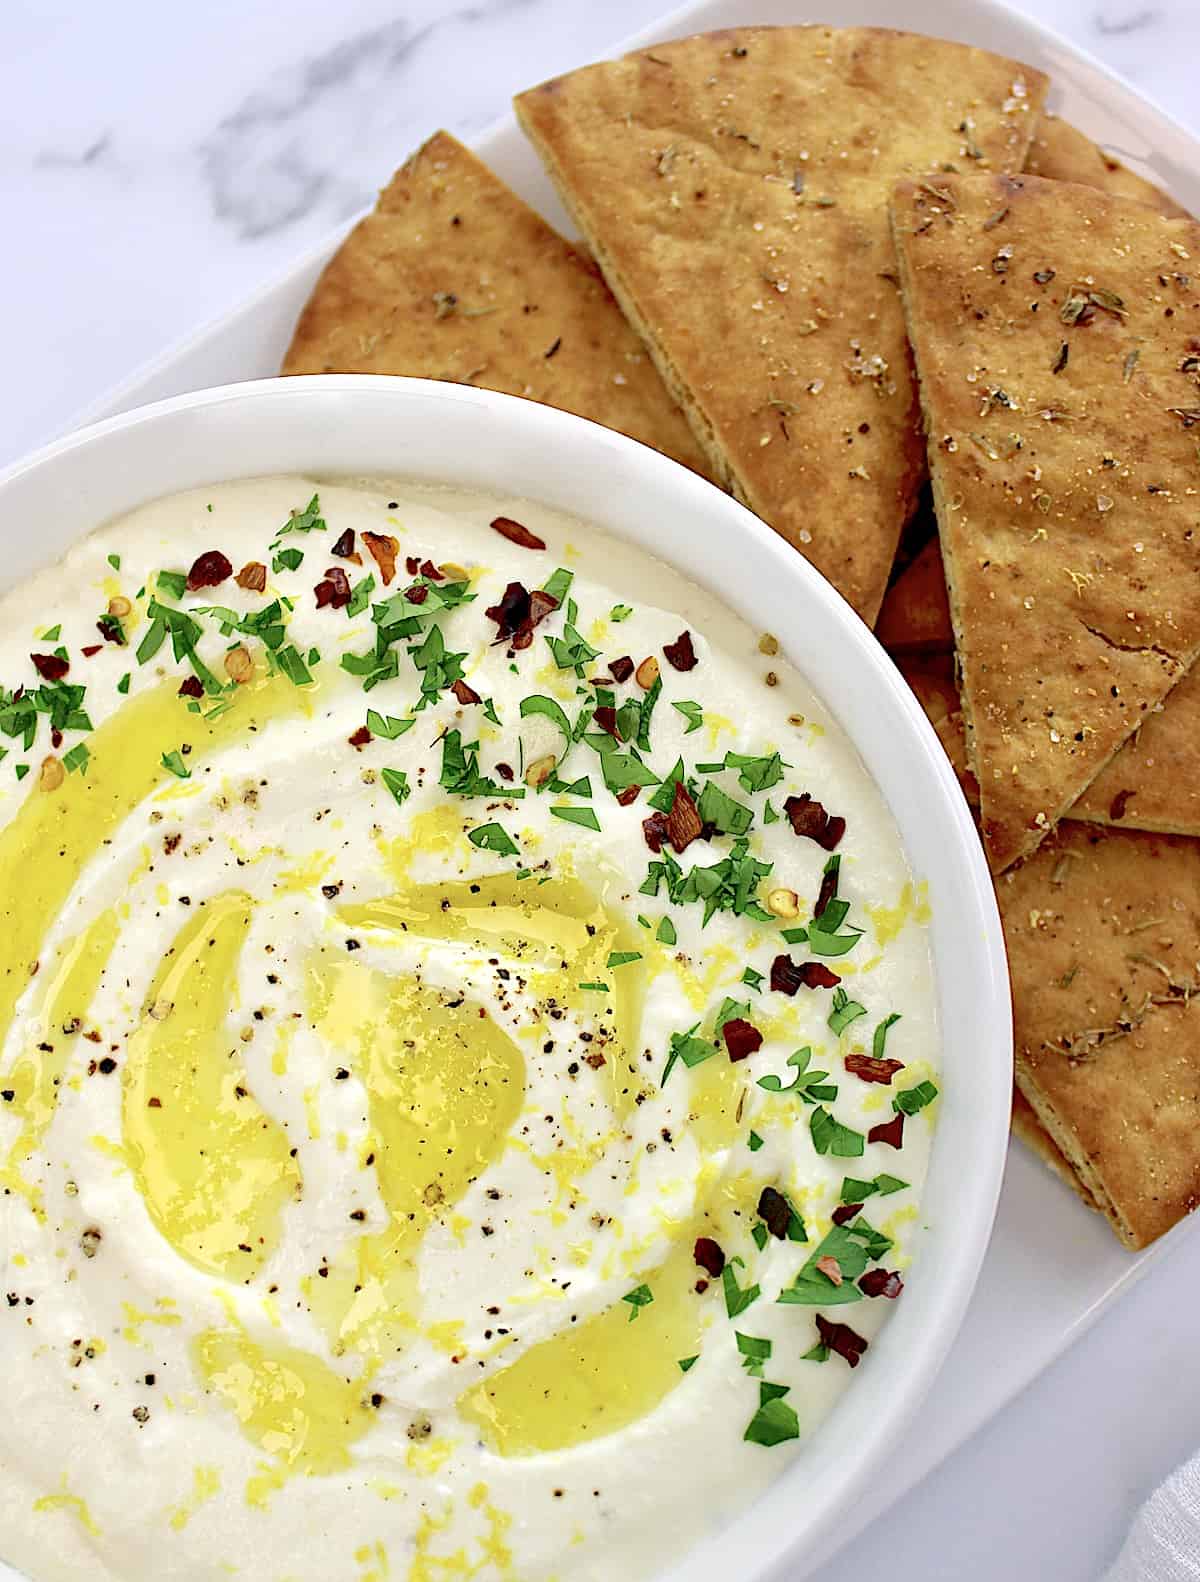 Whipped Feta Dip in white bowl with drizzle of olive oil and herbs, pita chips on side